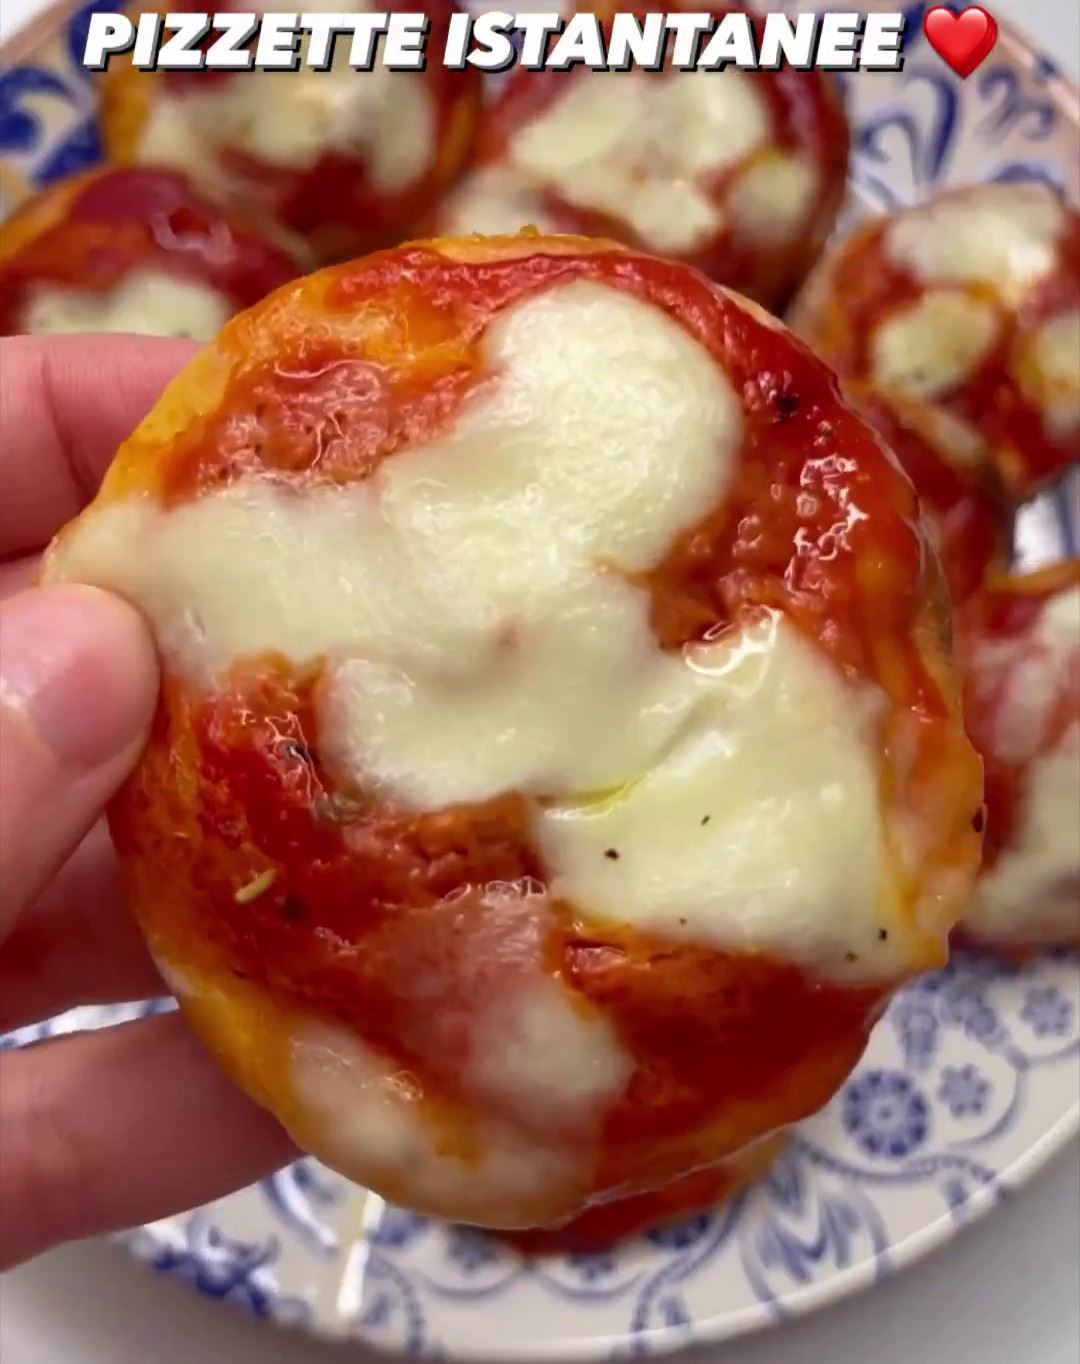 How to Prepare Instant Oven Mini Pizzas at Home